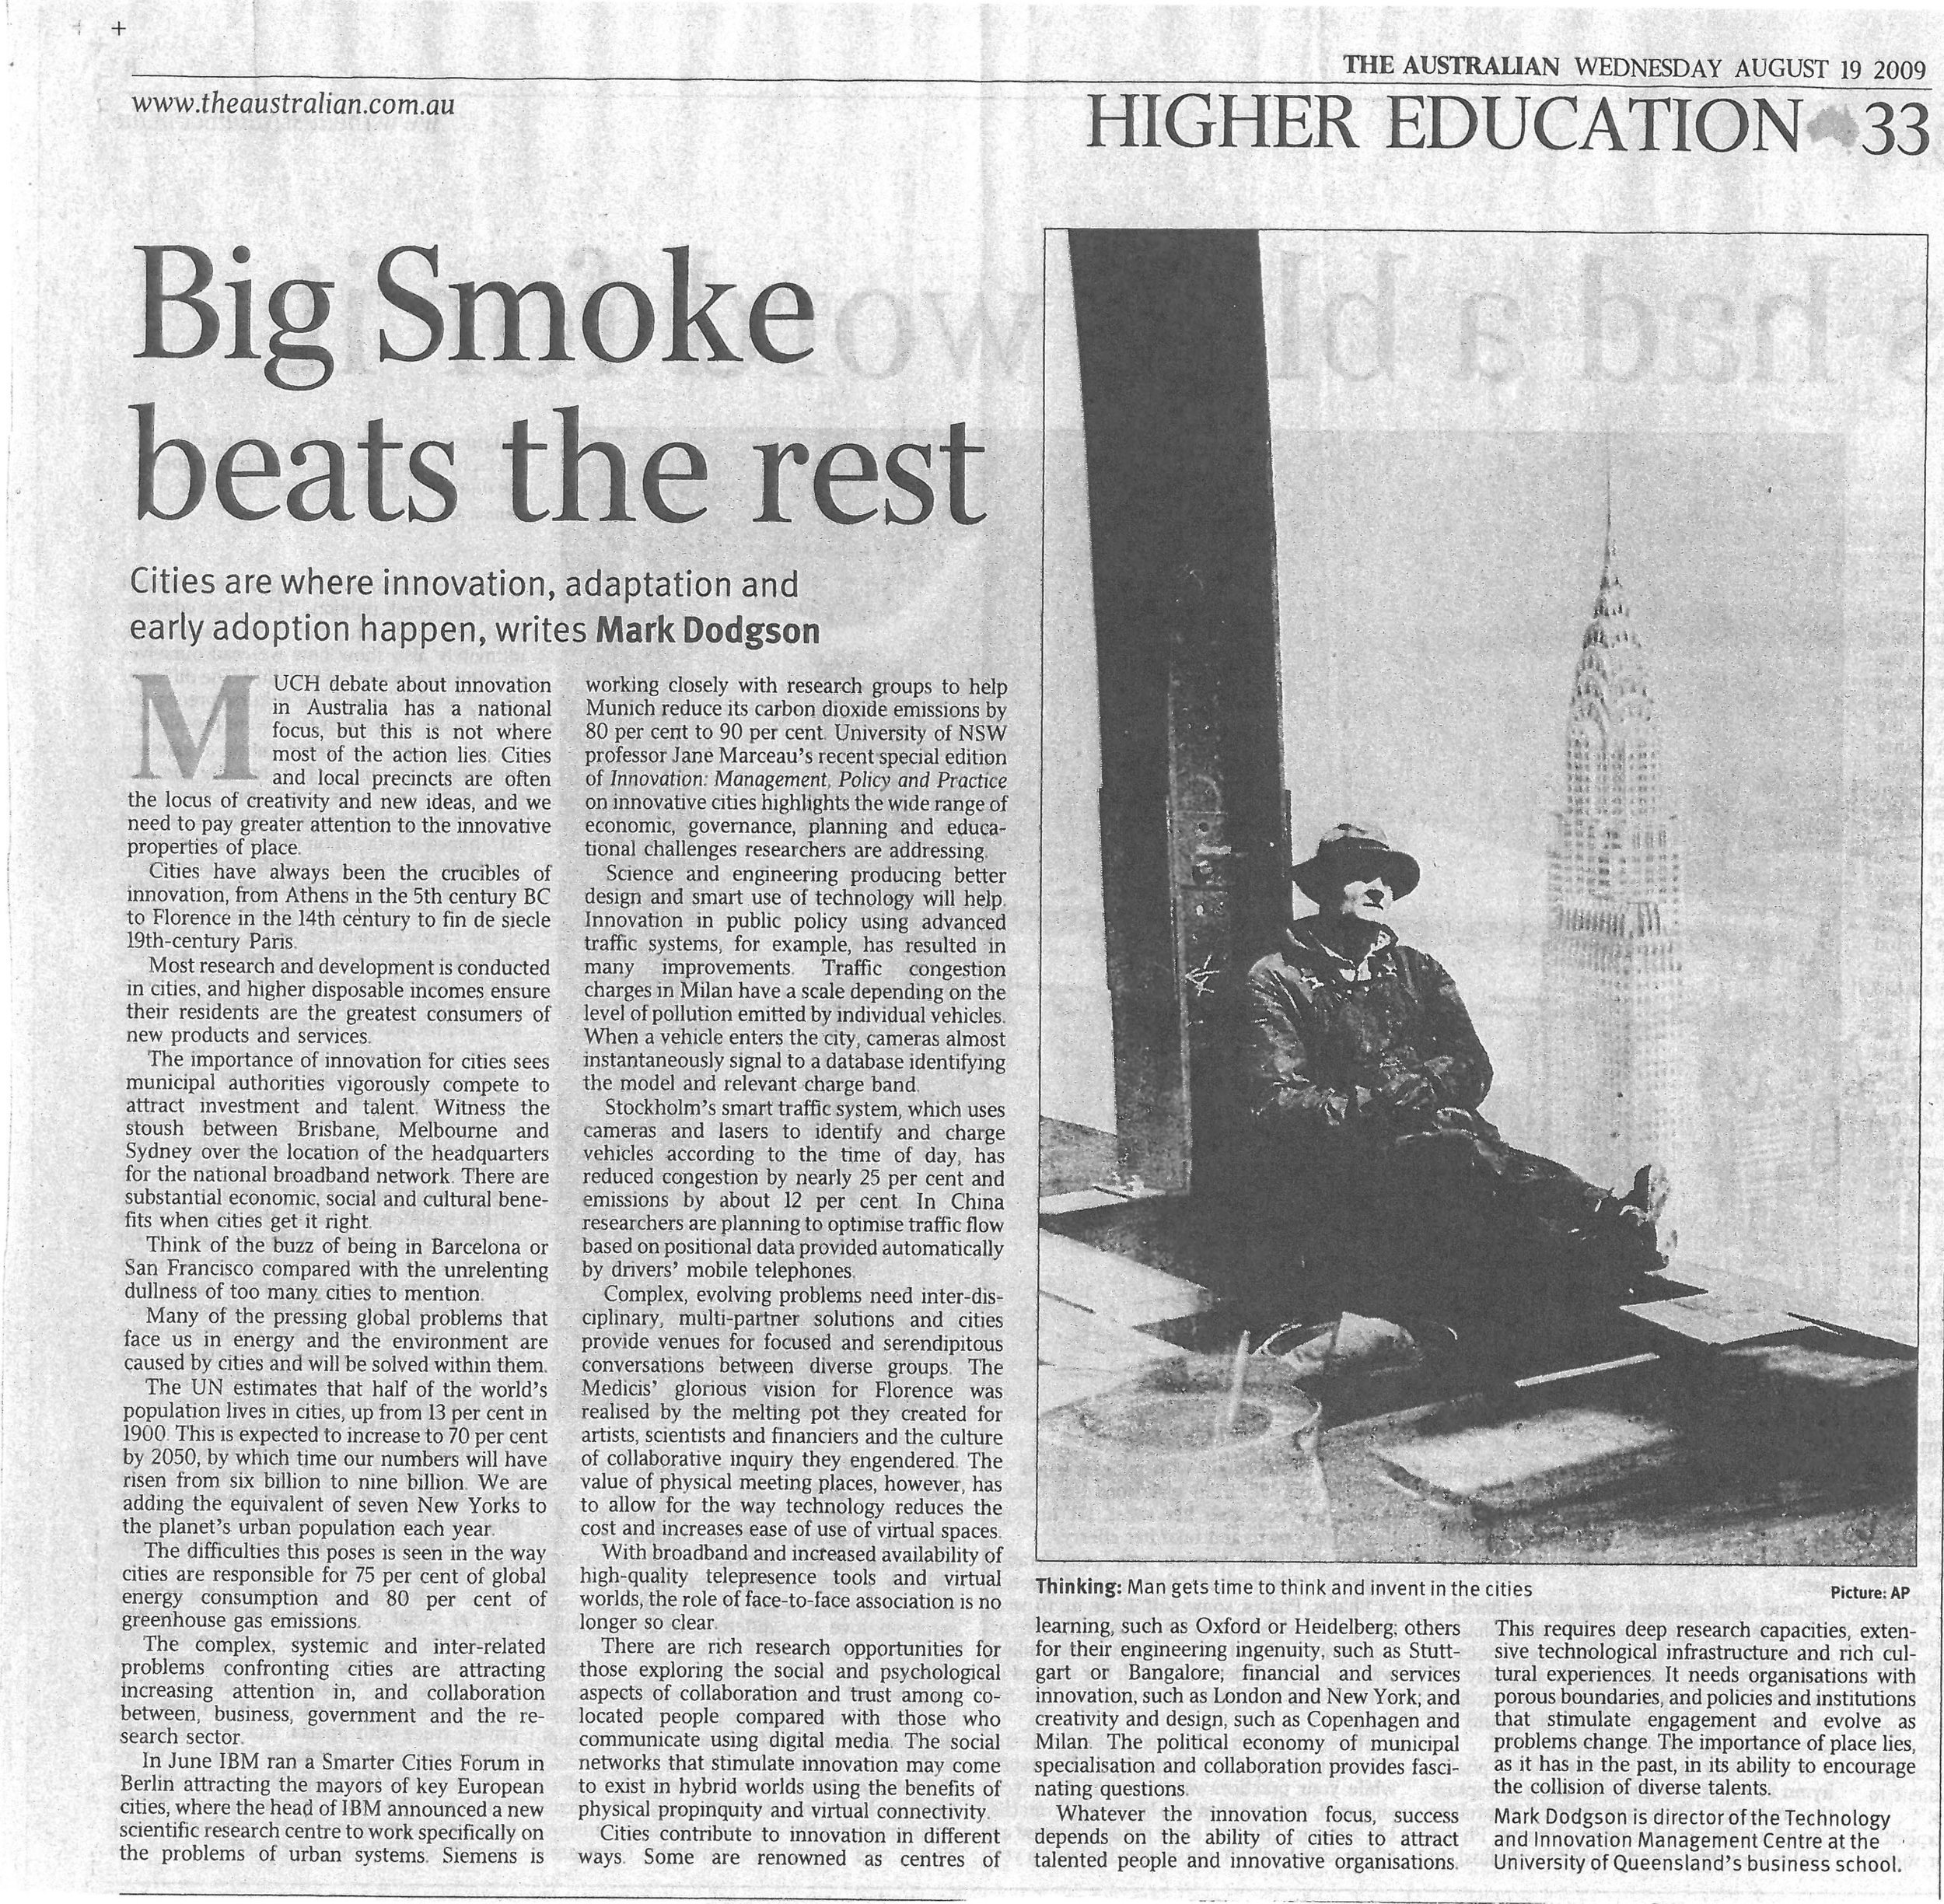 "Big smoke beats the rest" – on the importance of cities for innovation 19/08/2009